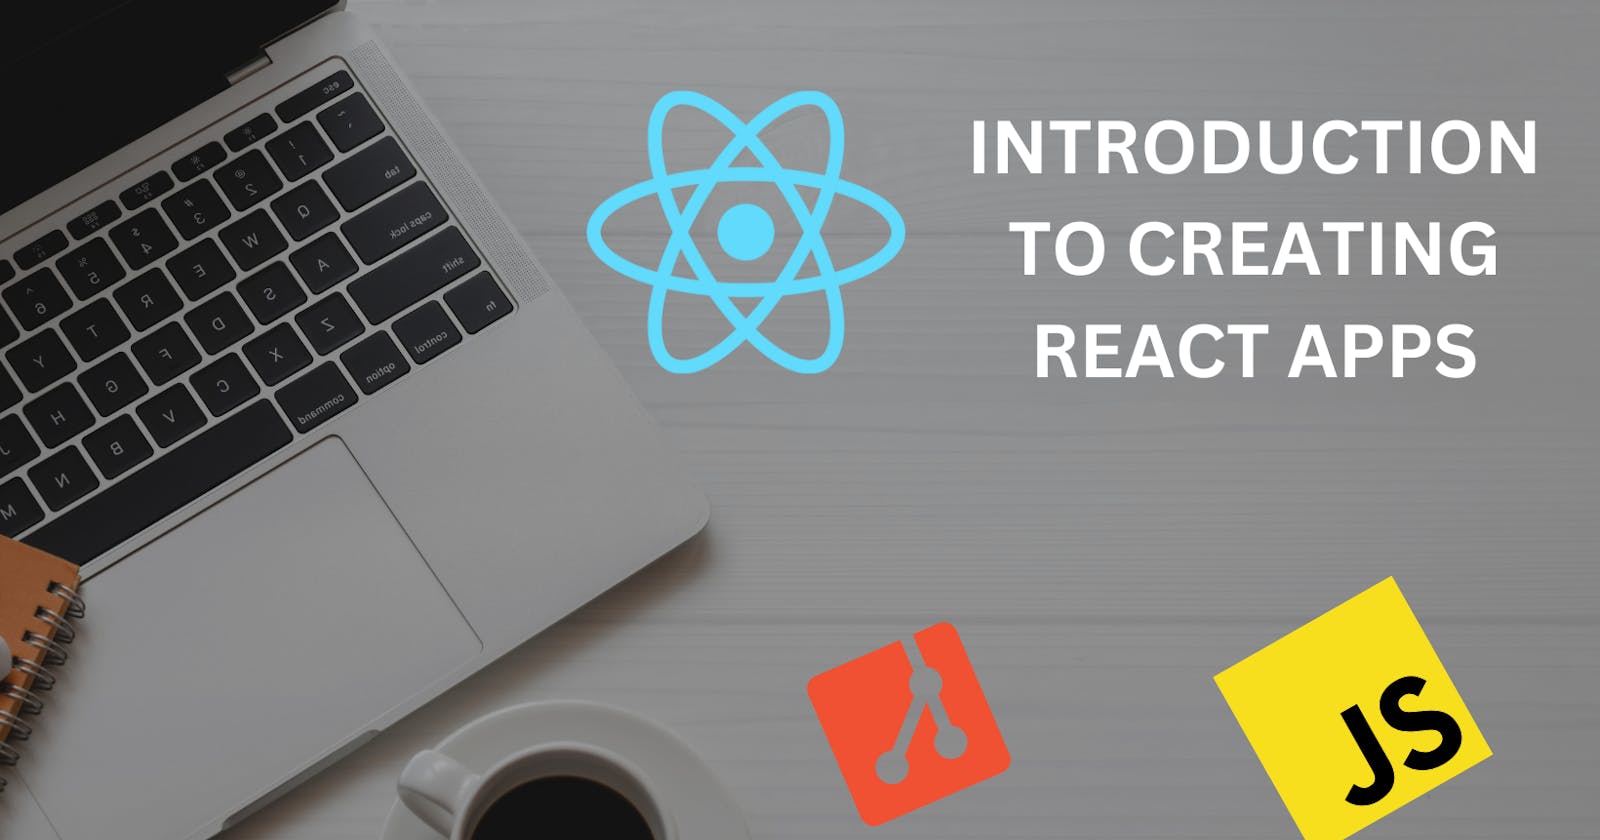 Introduction to Creating React Apps